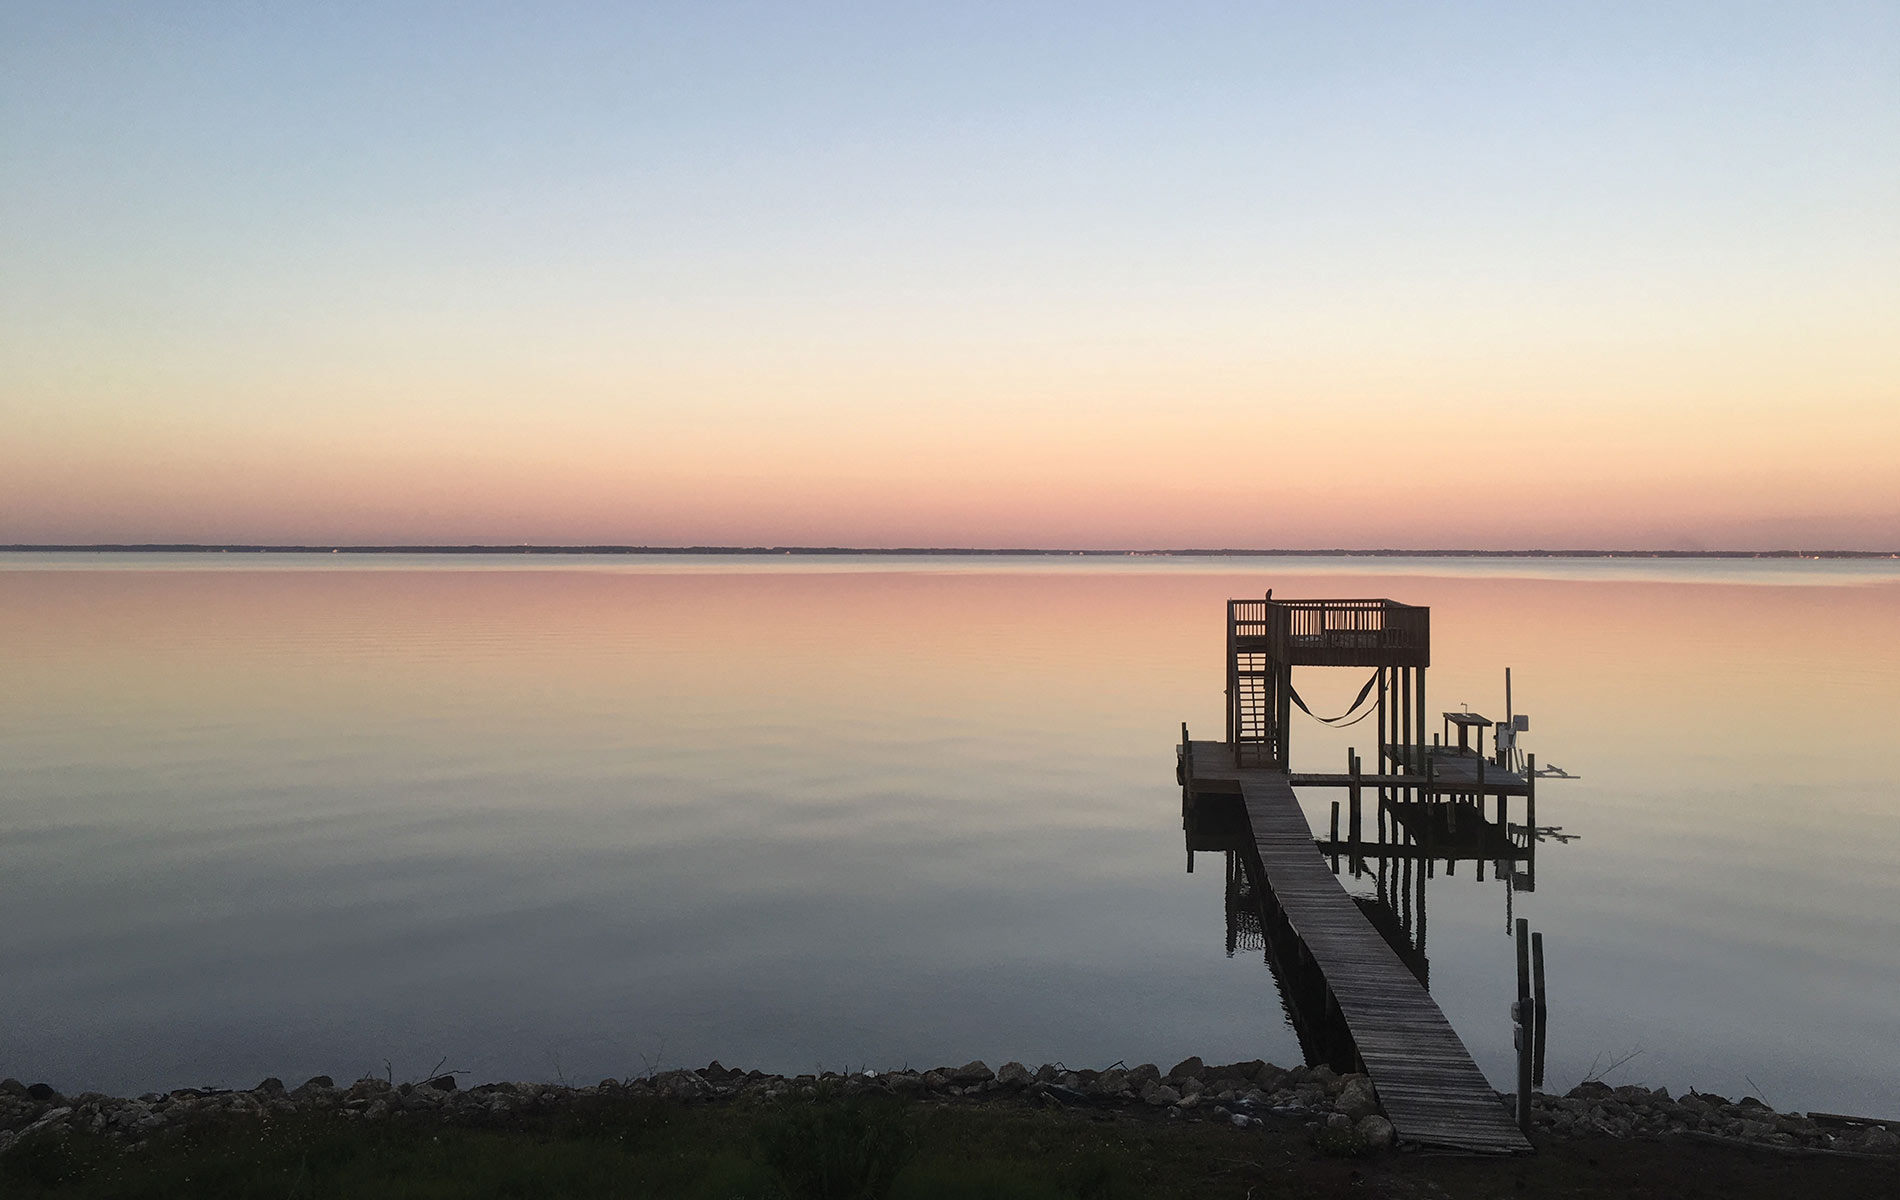 View of the dock and sunset on Florida's Choctawhatchee bay